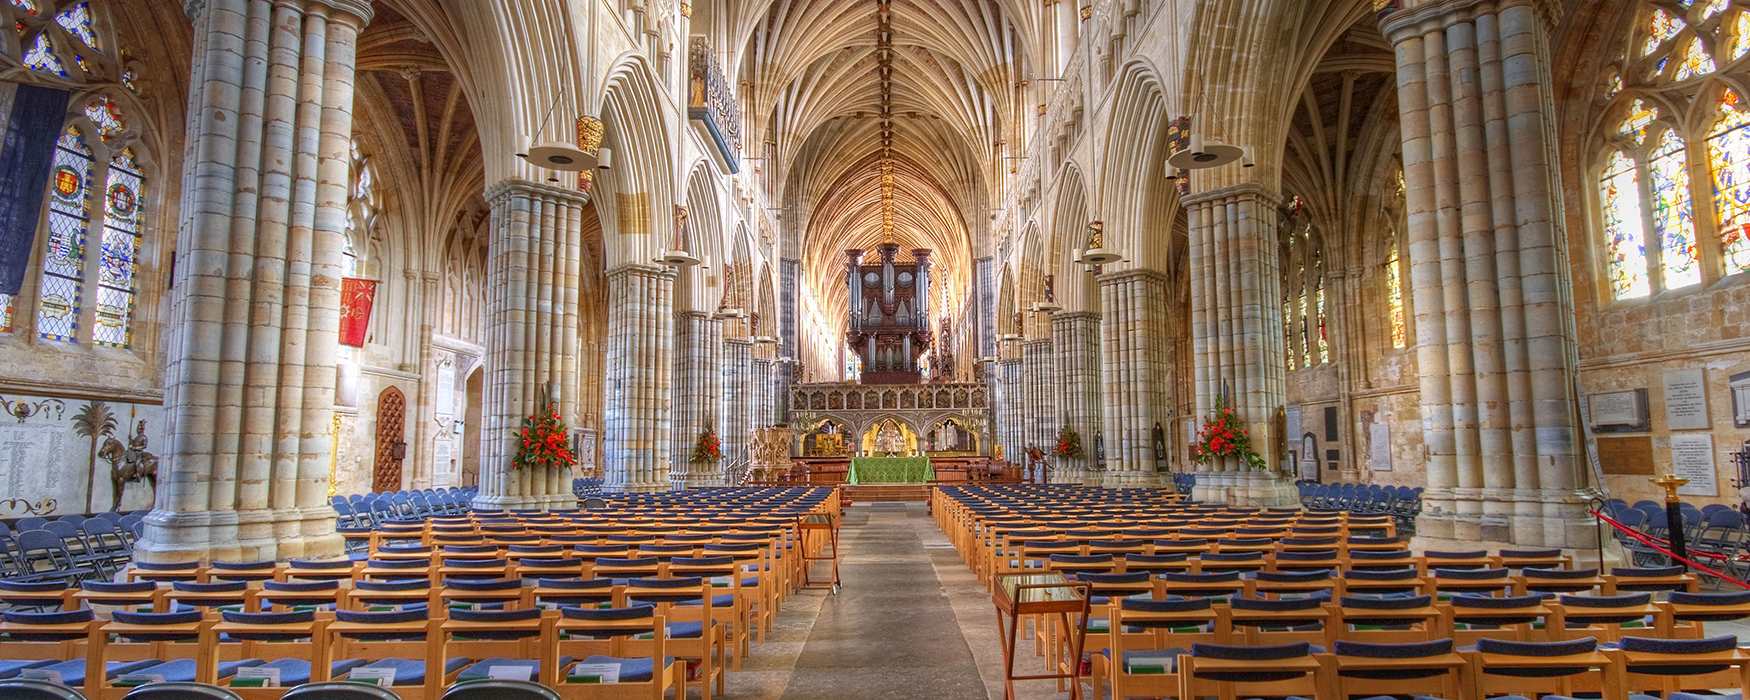 Internal of the Exeter Cathedral